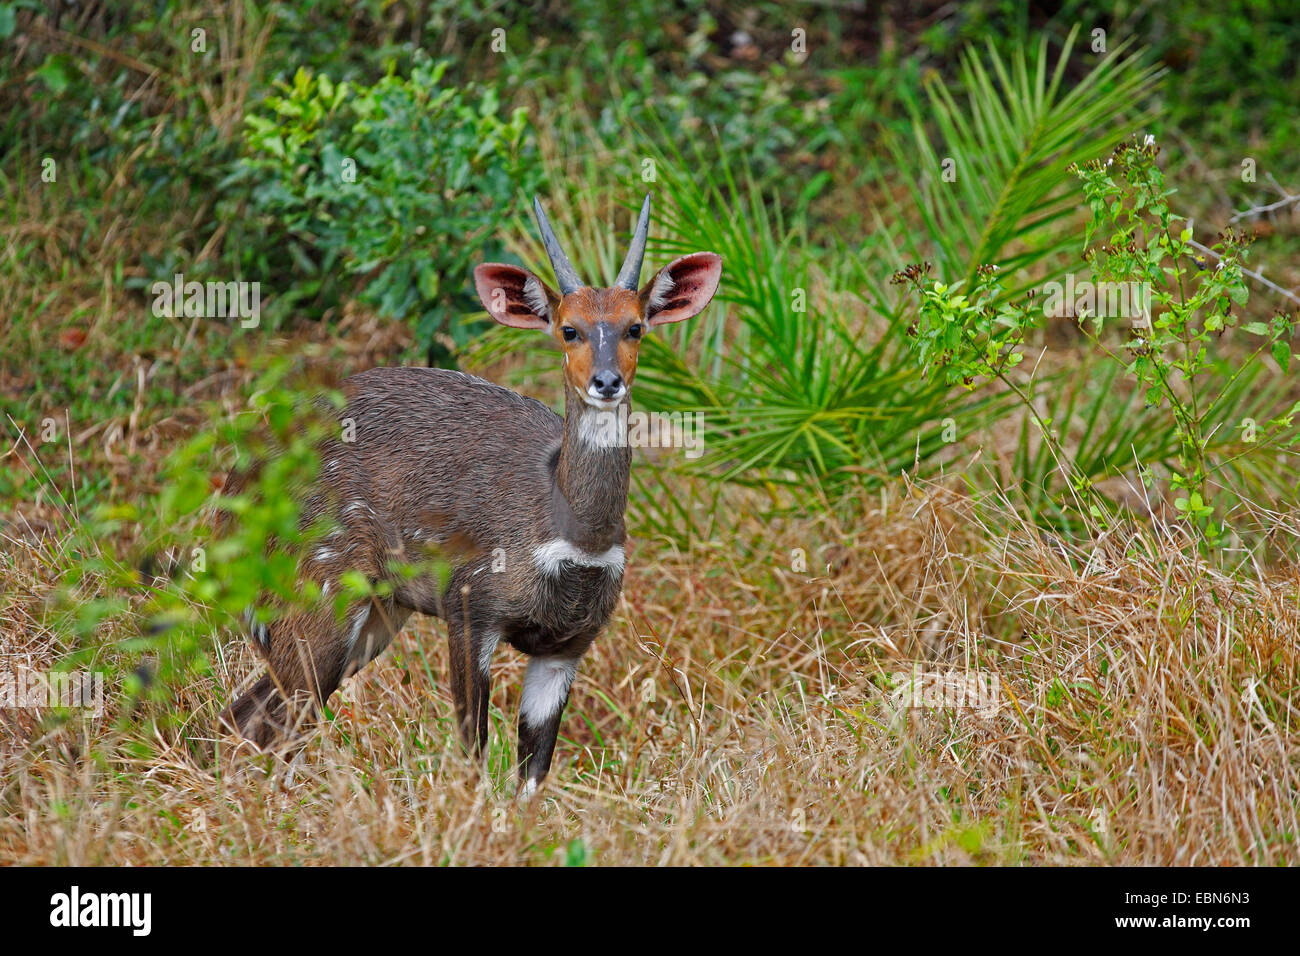 bushbuck, harnessed antelope (Tragelaphus scriptus), young male, South Africa, St. Lucia Wetland Park Stock Photo